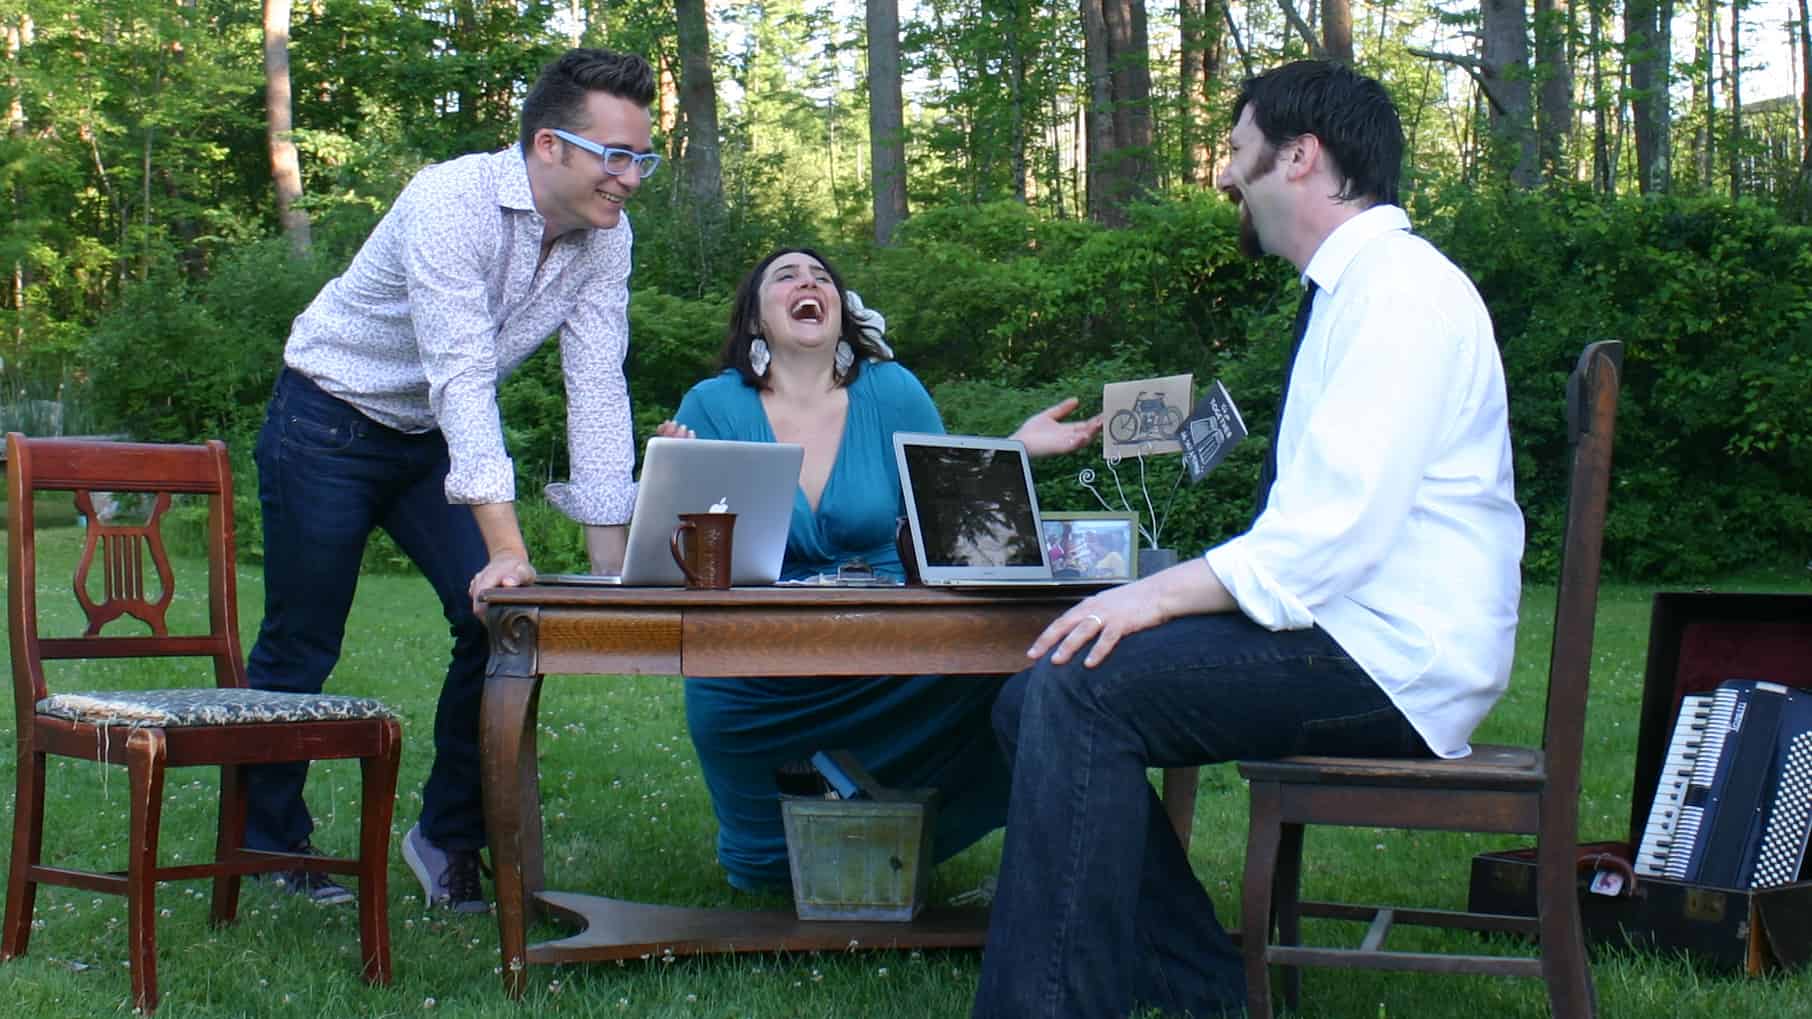 The founders of the Berkshire Fringe Festival including Sara Katzoff laugh together at an outdoor table. Press photo courtesy of Berkshire Fringe